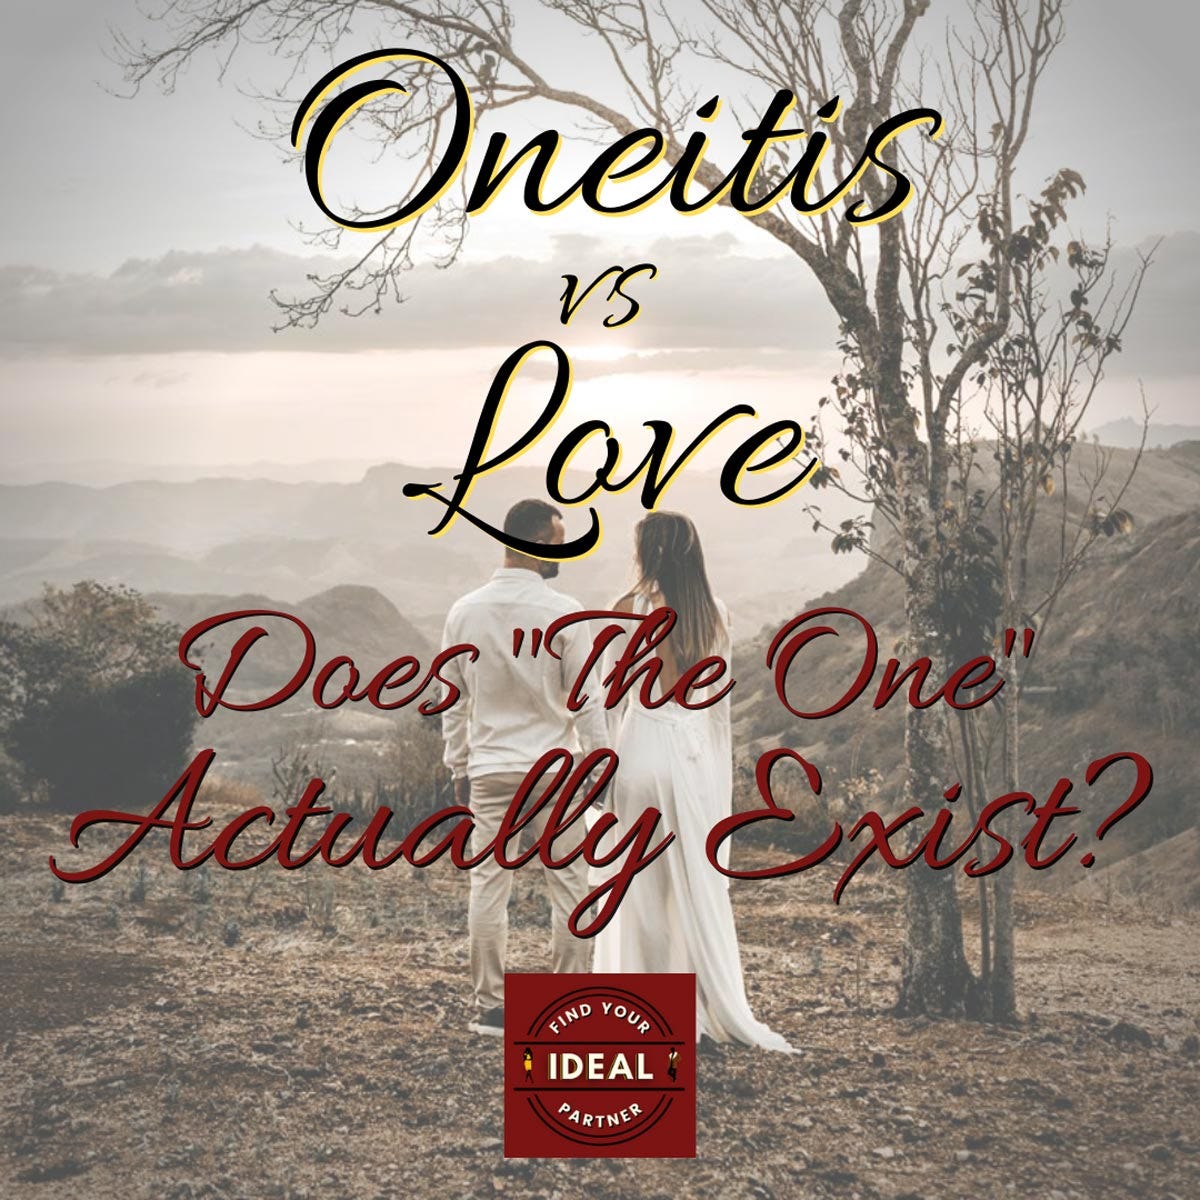 Oneitis vs Love — Does “The One” Actually Exist?, by Thomas Kallos